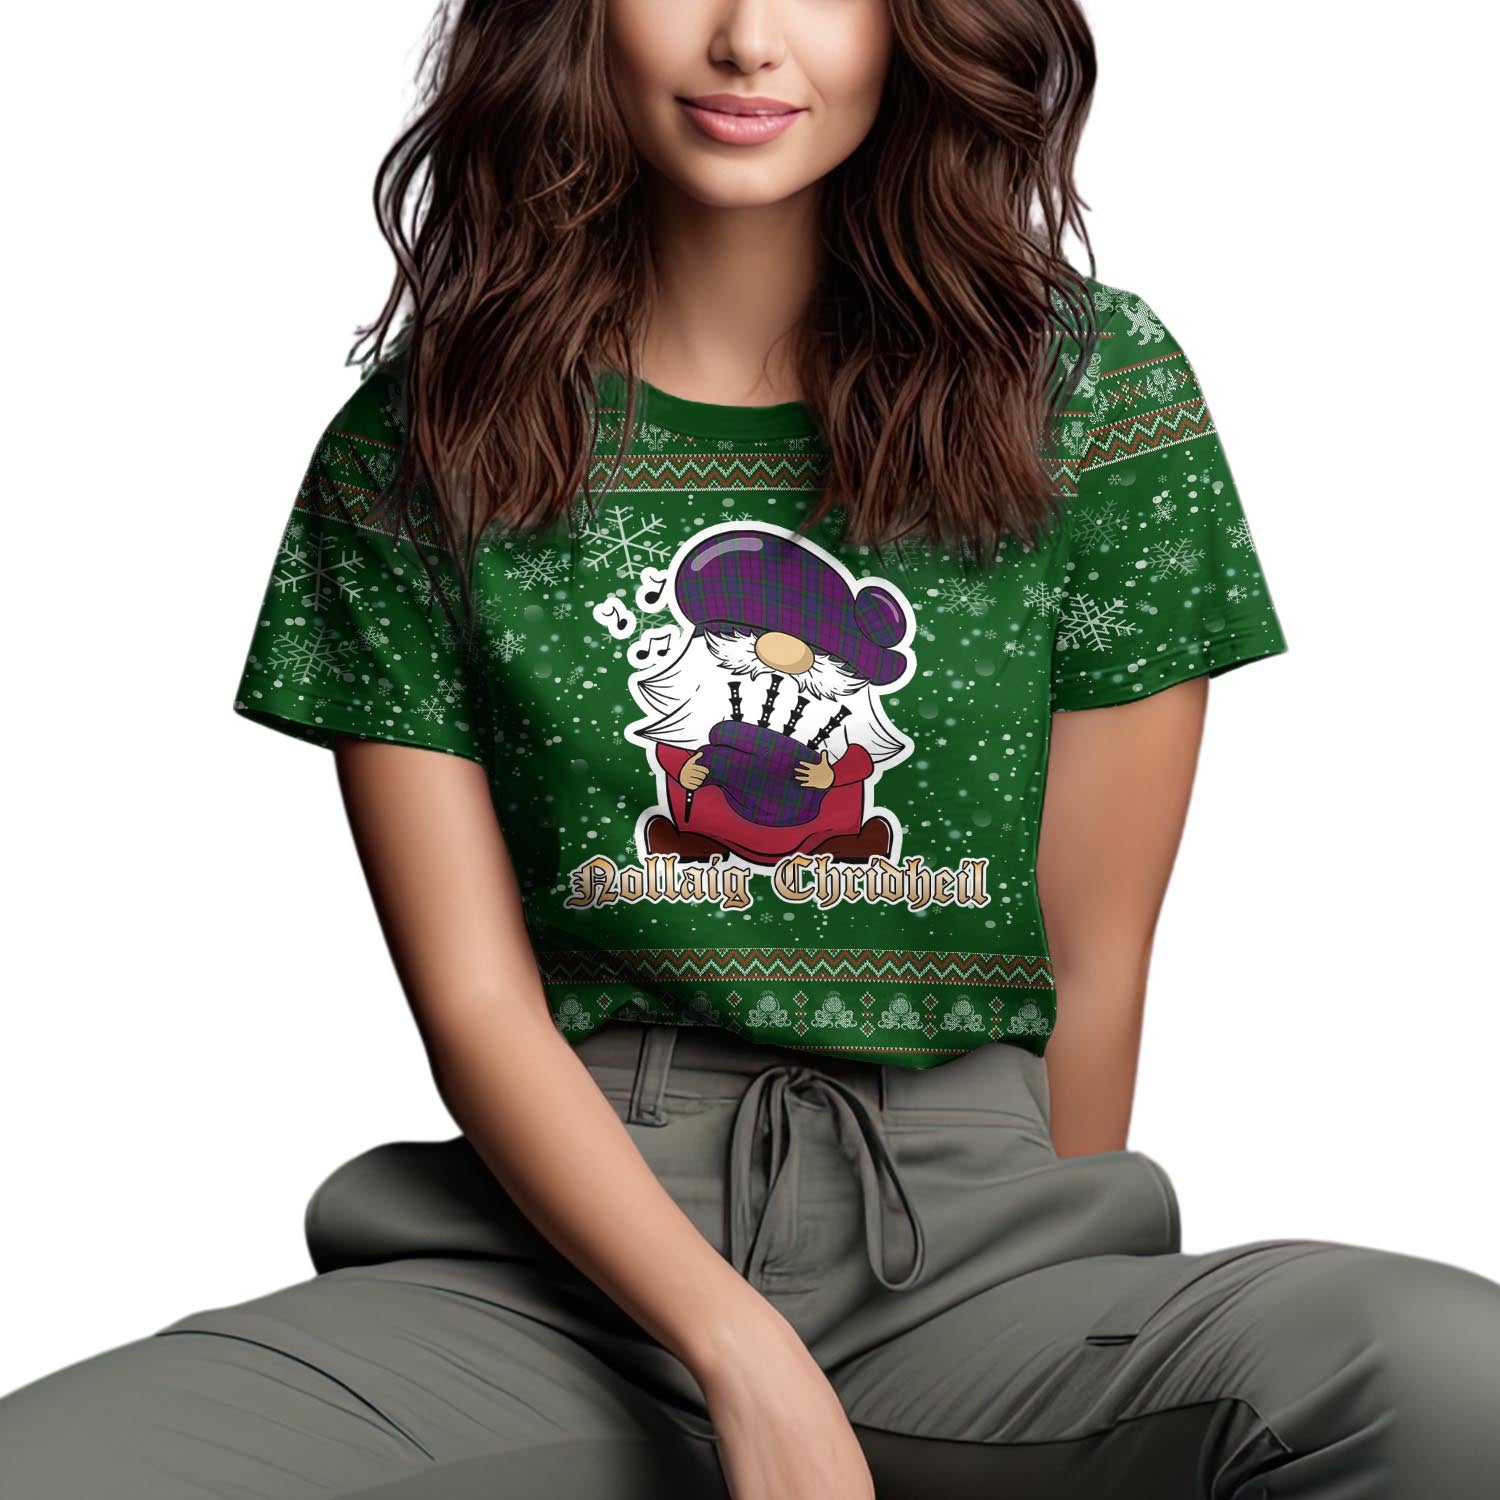 Wardlaw Clan Christmas Family T-Shirt with Funny Gnome Playing Bagpipes Women's Shirt Green - Tartanvibesclothing